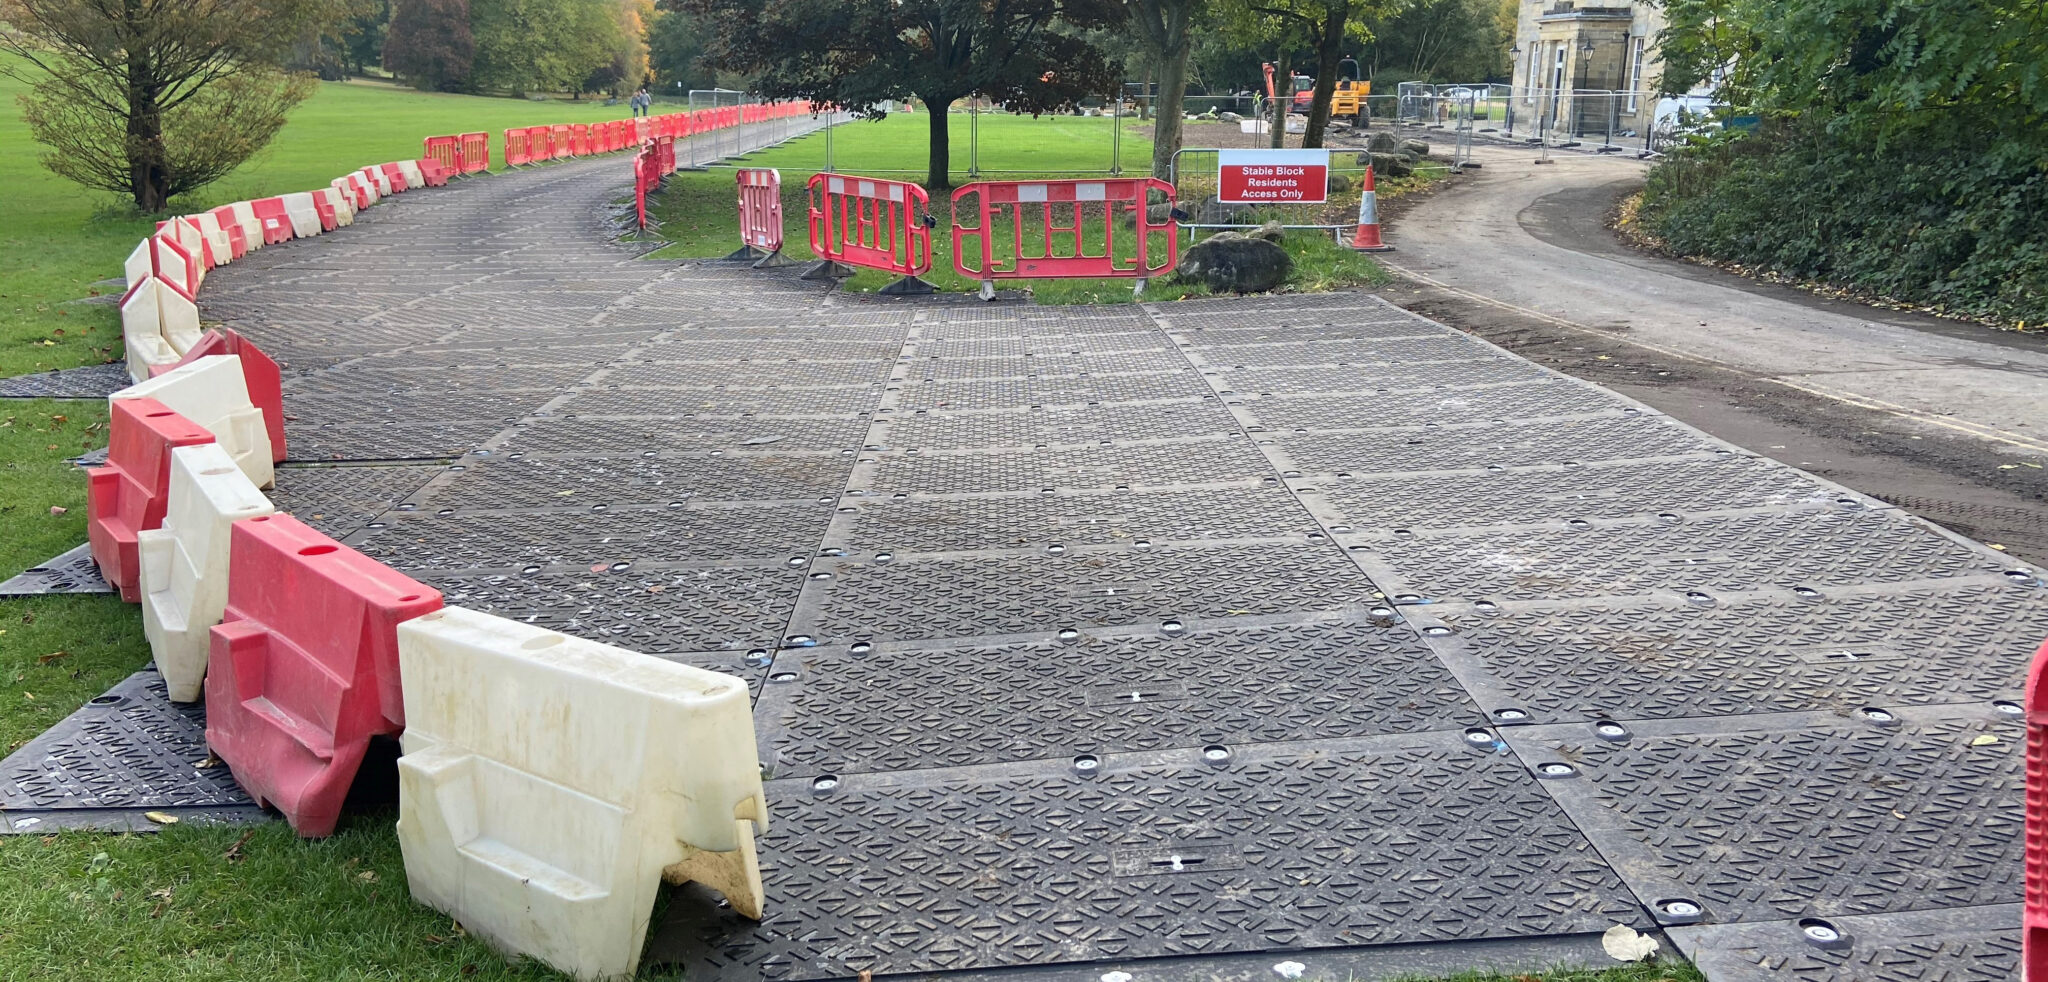 Temporary roadway across public park grass field local authority